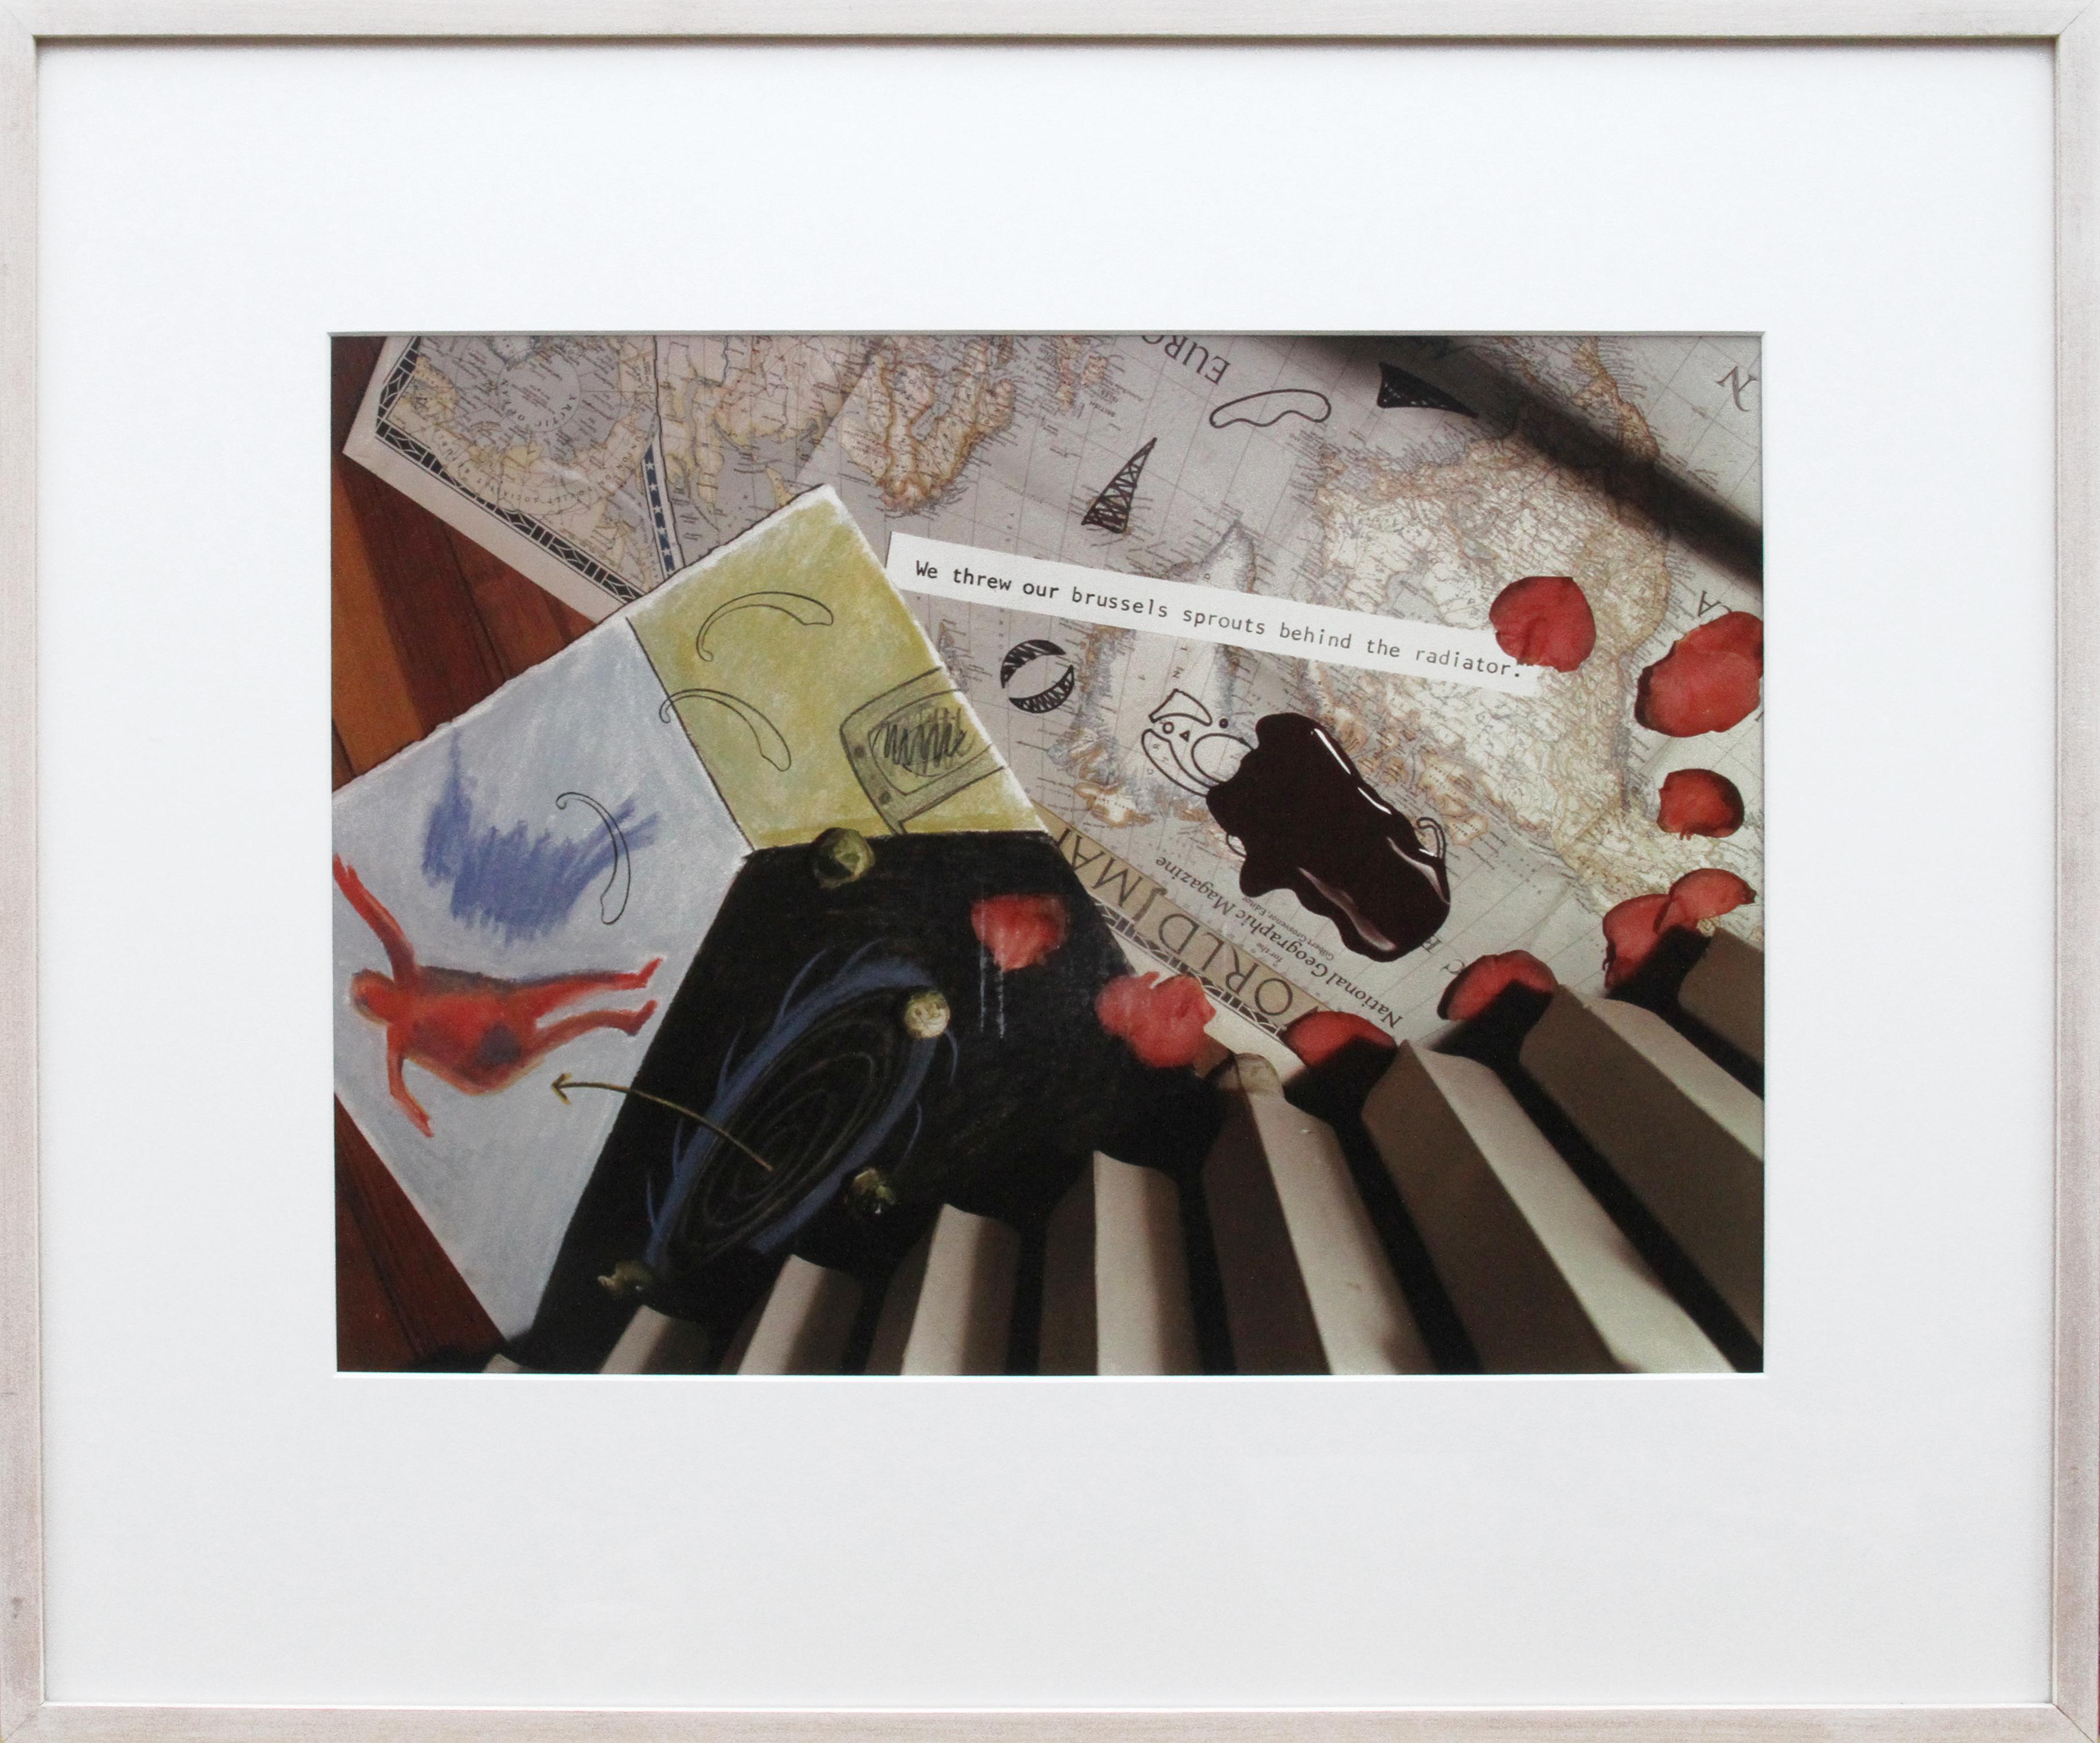 Artist: Maggie Taylor, American (1961 - )
Title: Untitled (We Threw Our Brussels Sprouts Behind the Radiator)
Year: 1988
Medium: Color Photograph
Edition: 15
Size: 12.5 x 16.5 in. (31.75 x 41.91 cm)